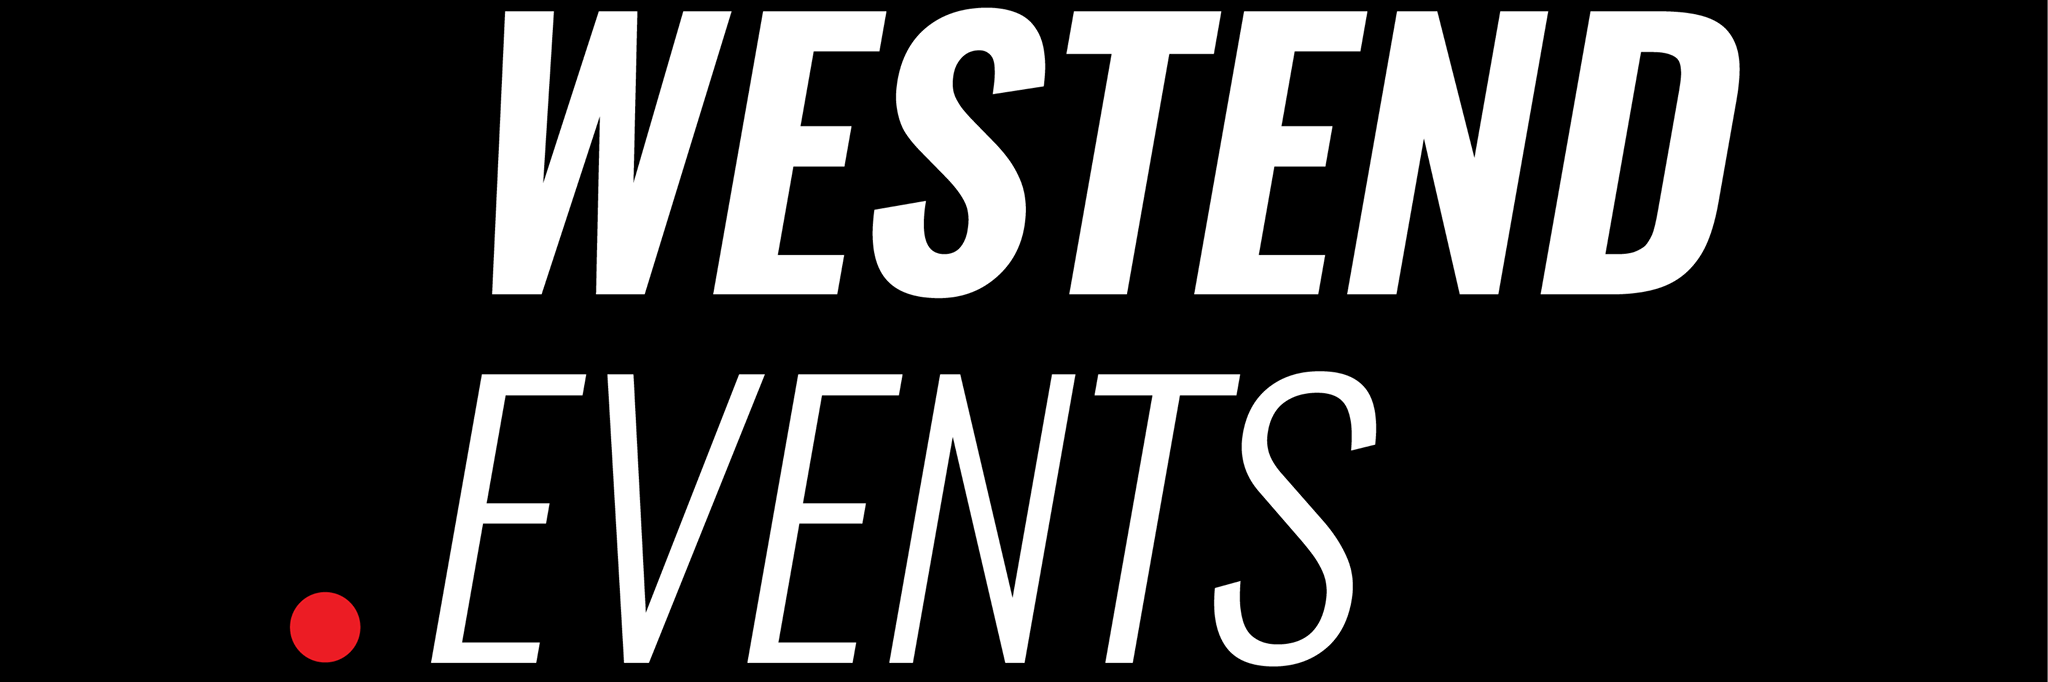 Westend Events by Andree Heikes